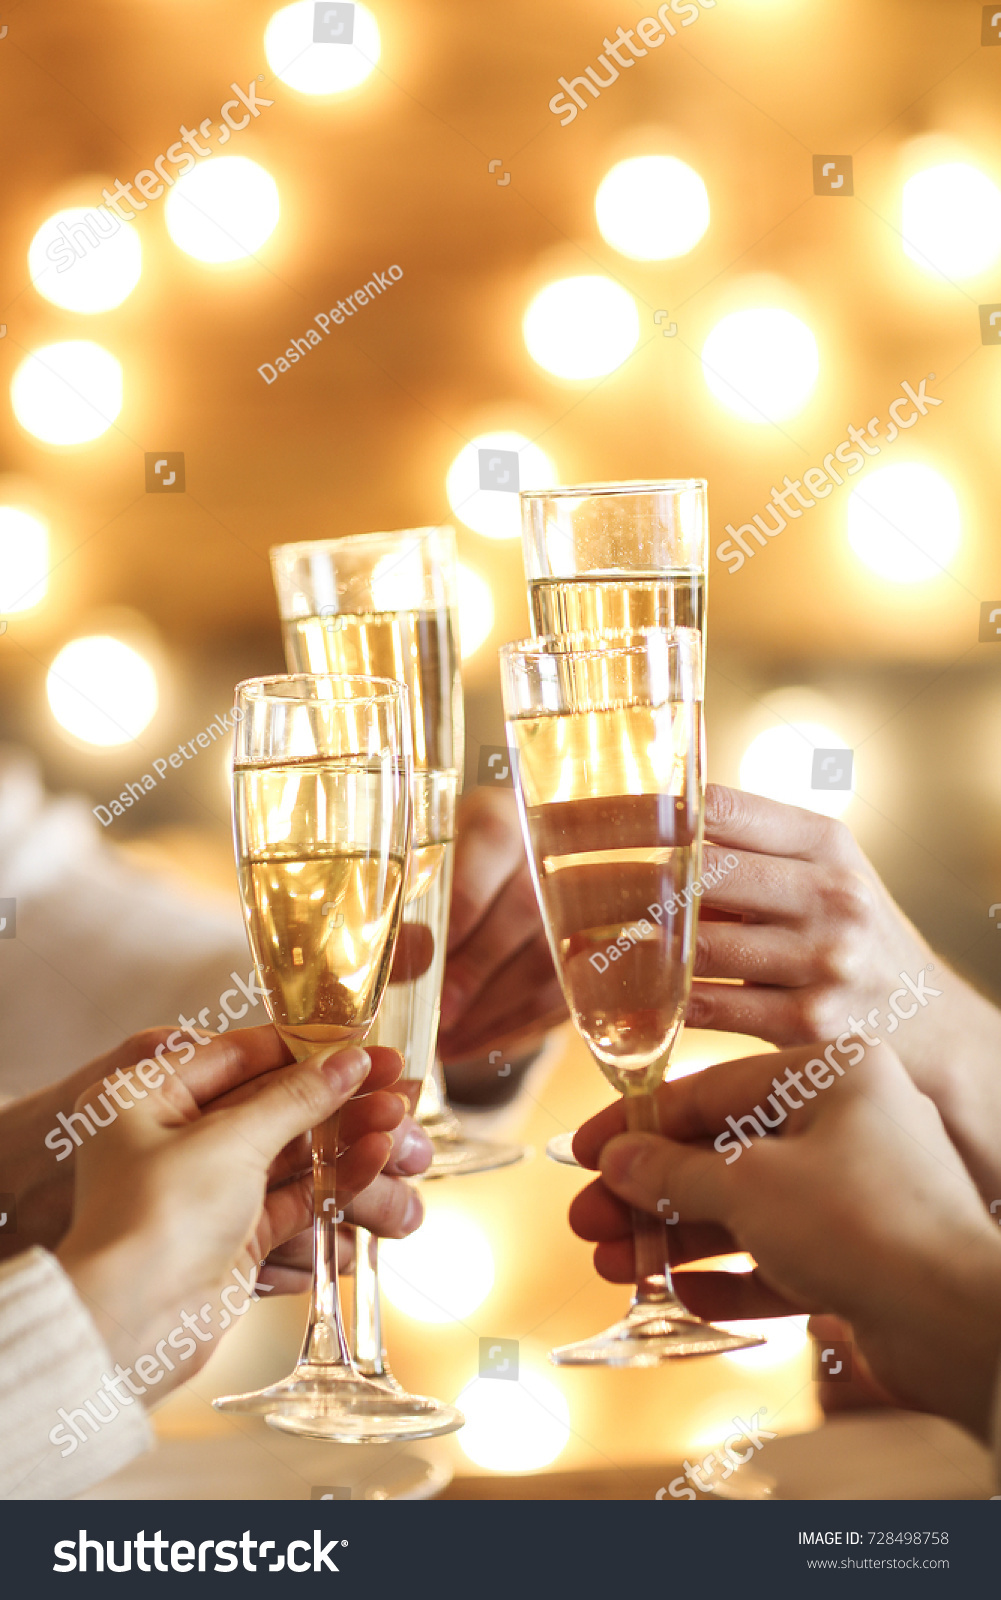 Champagne glasses in hands on golden background. Party and celebration concept #728498758